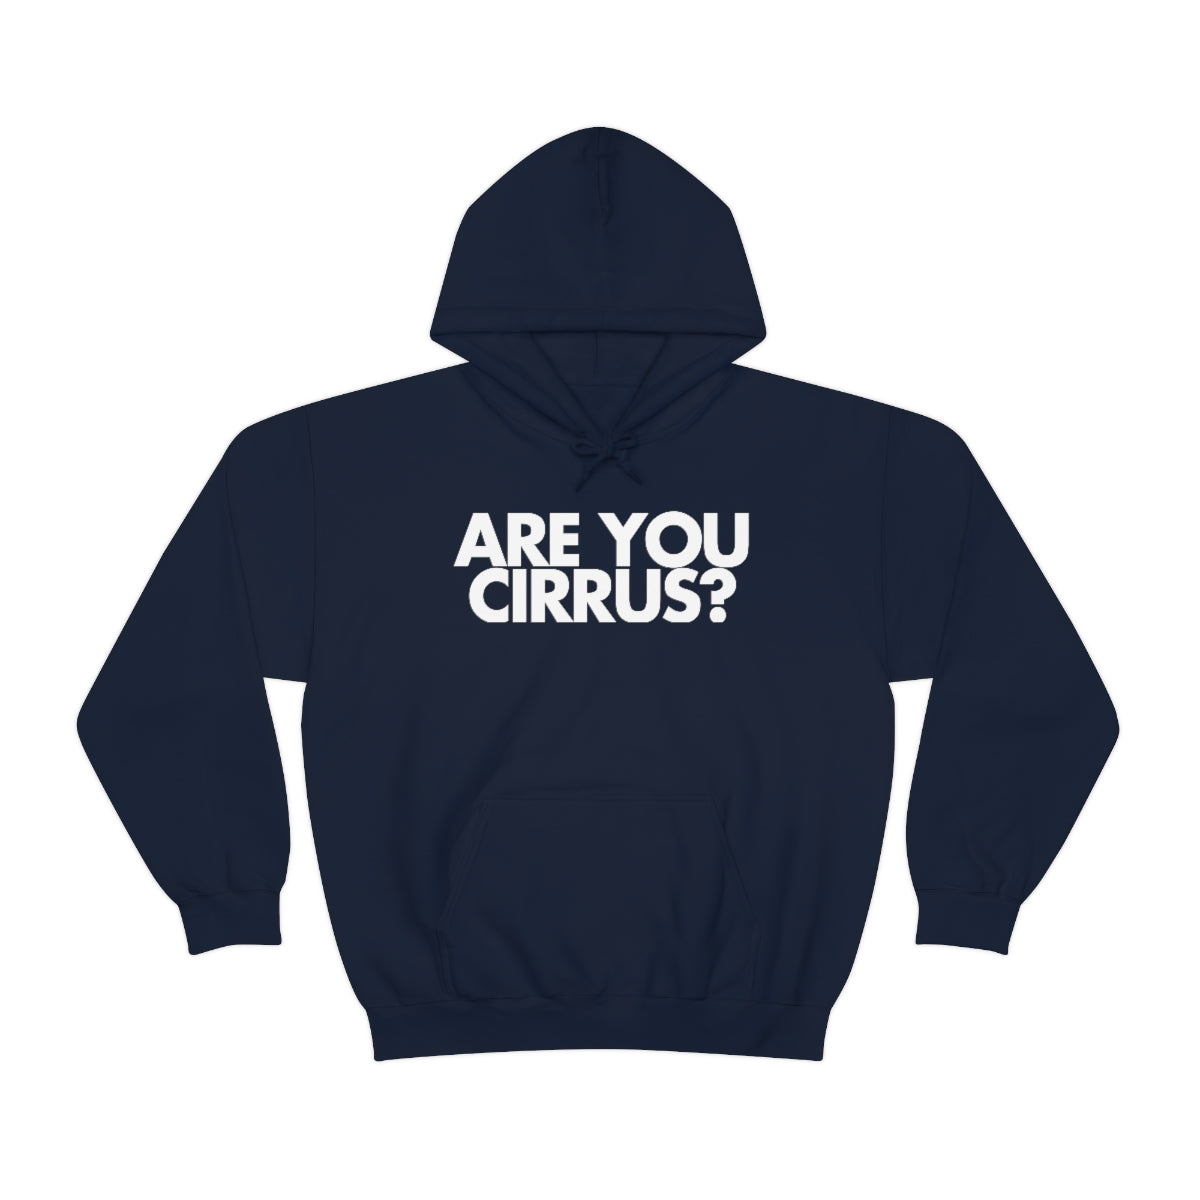 Are You Cirrus? Hoodie 